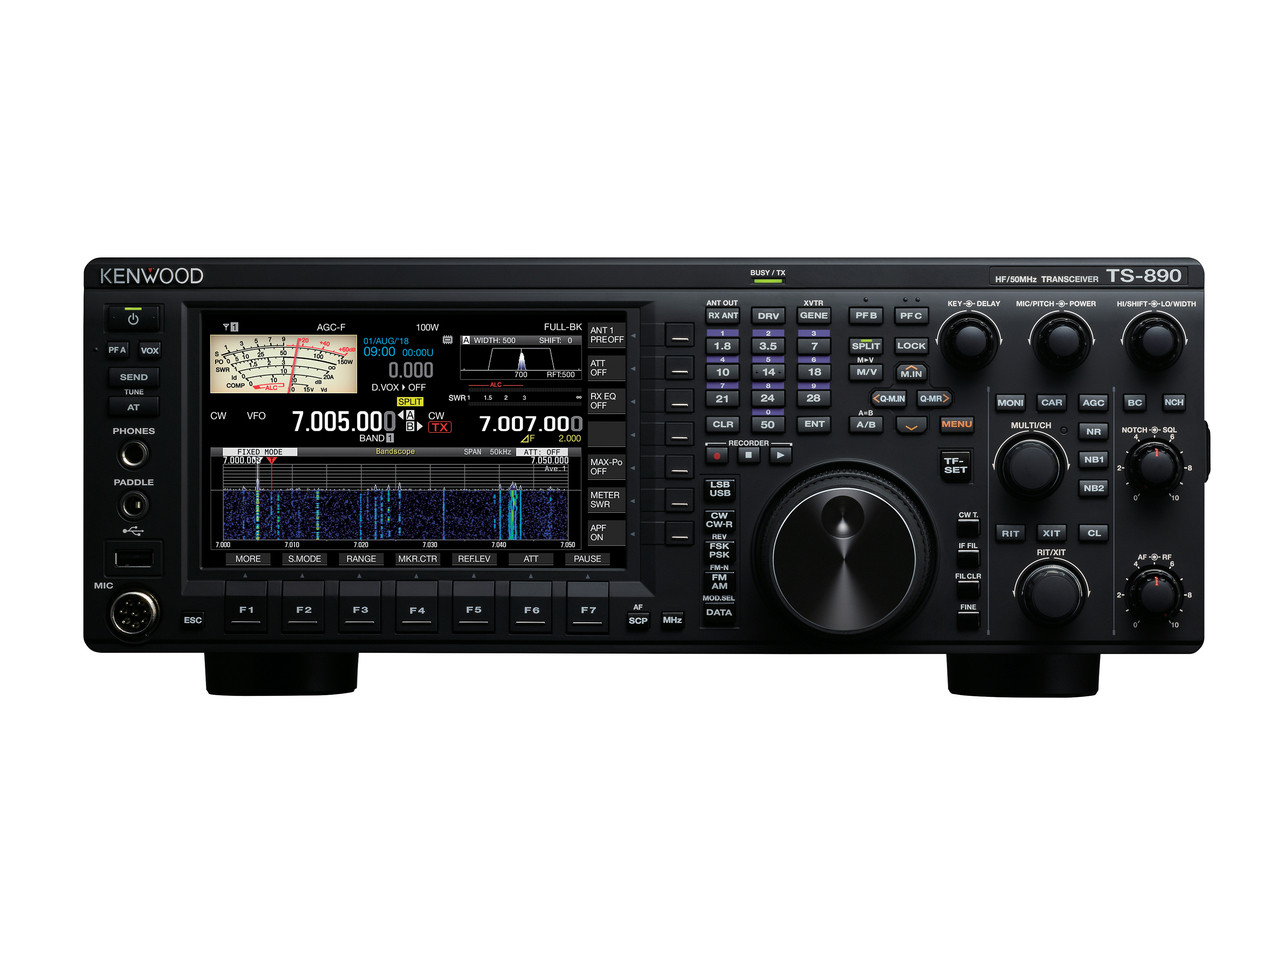 KENWOOD TS-890S HF + 6 METER TRANSCEIVER In Stock Sex Image Hq